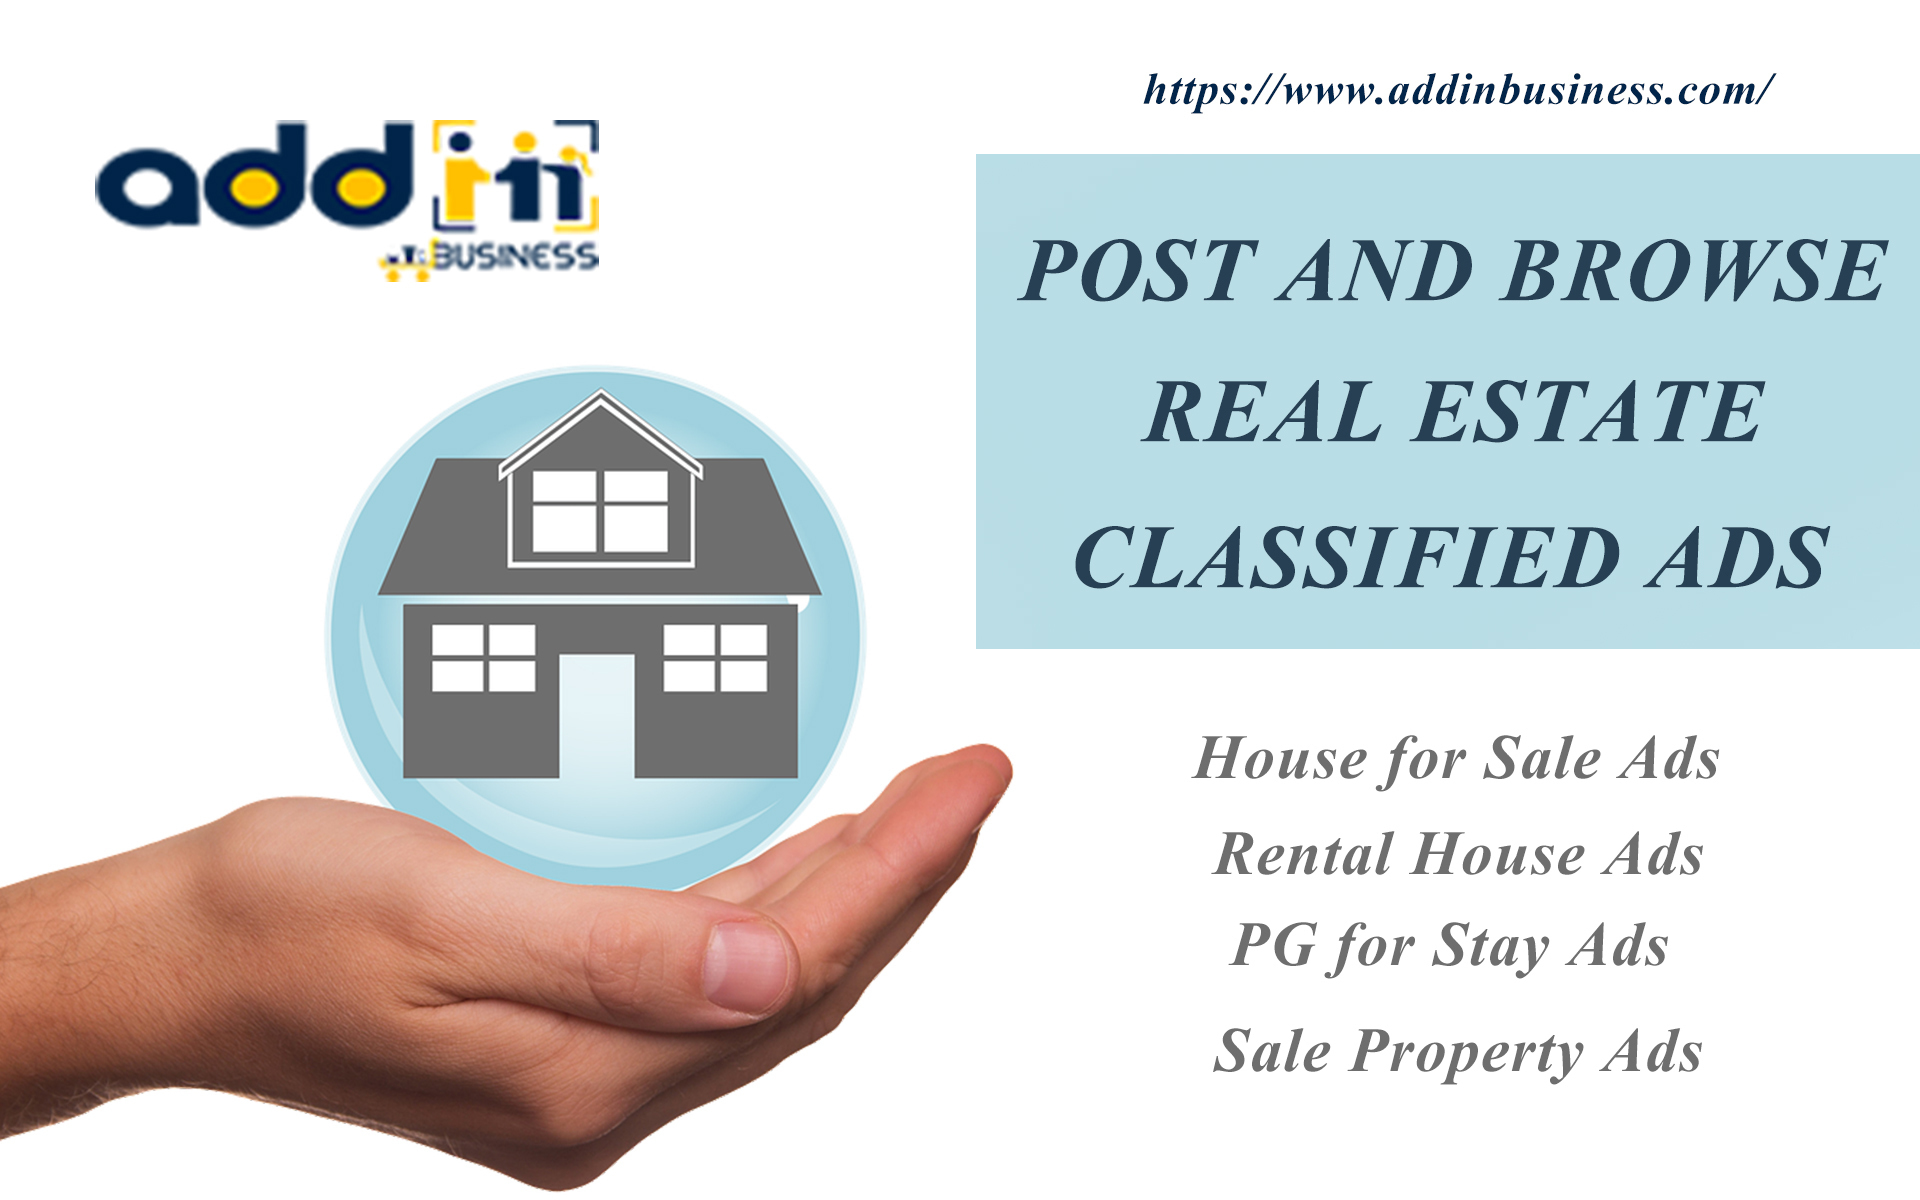 Classified ads. Real Estate classifieds. Real Estate advertisement. Ad posting